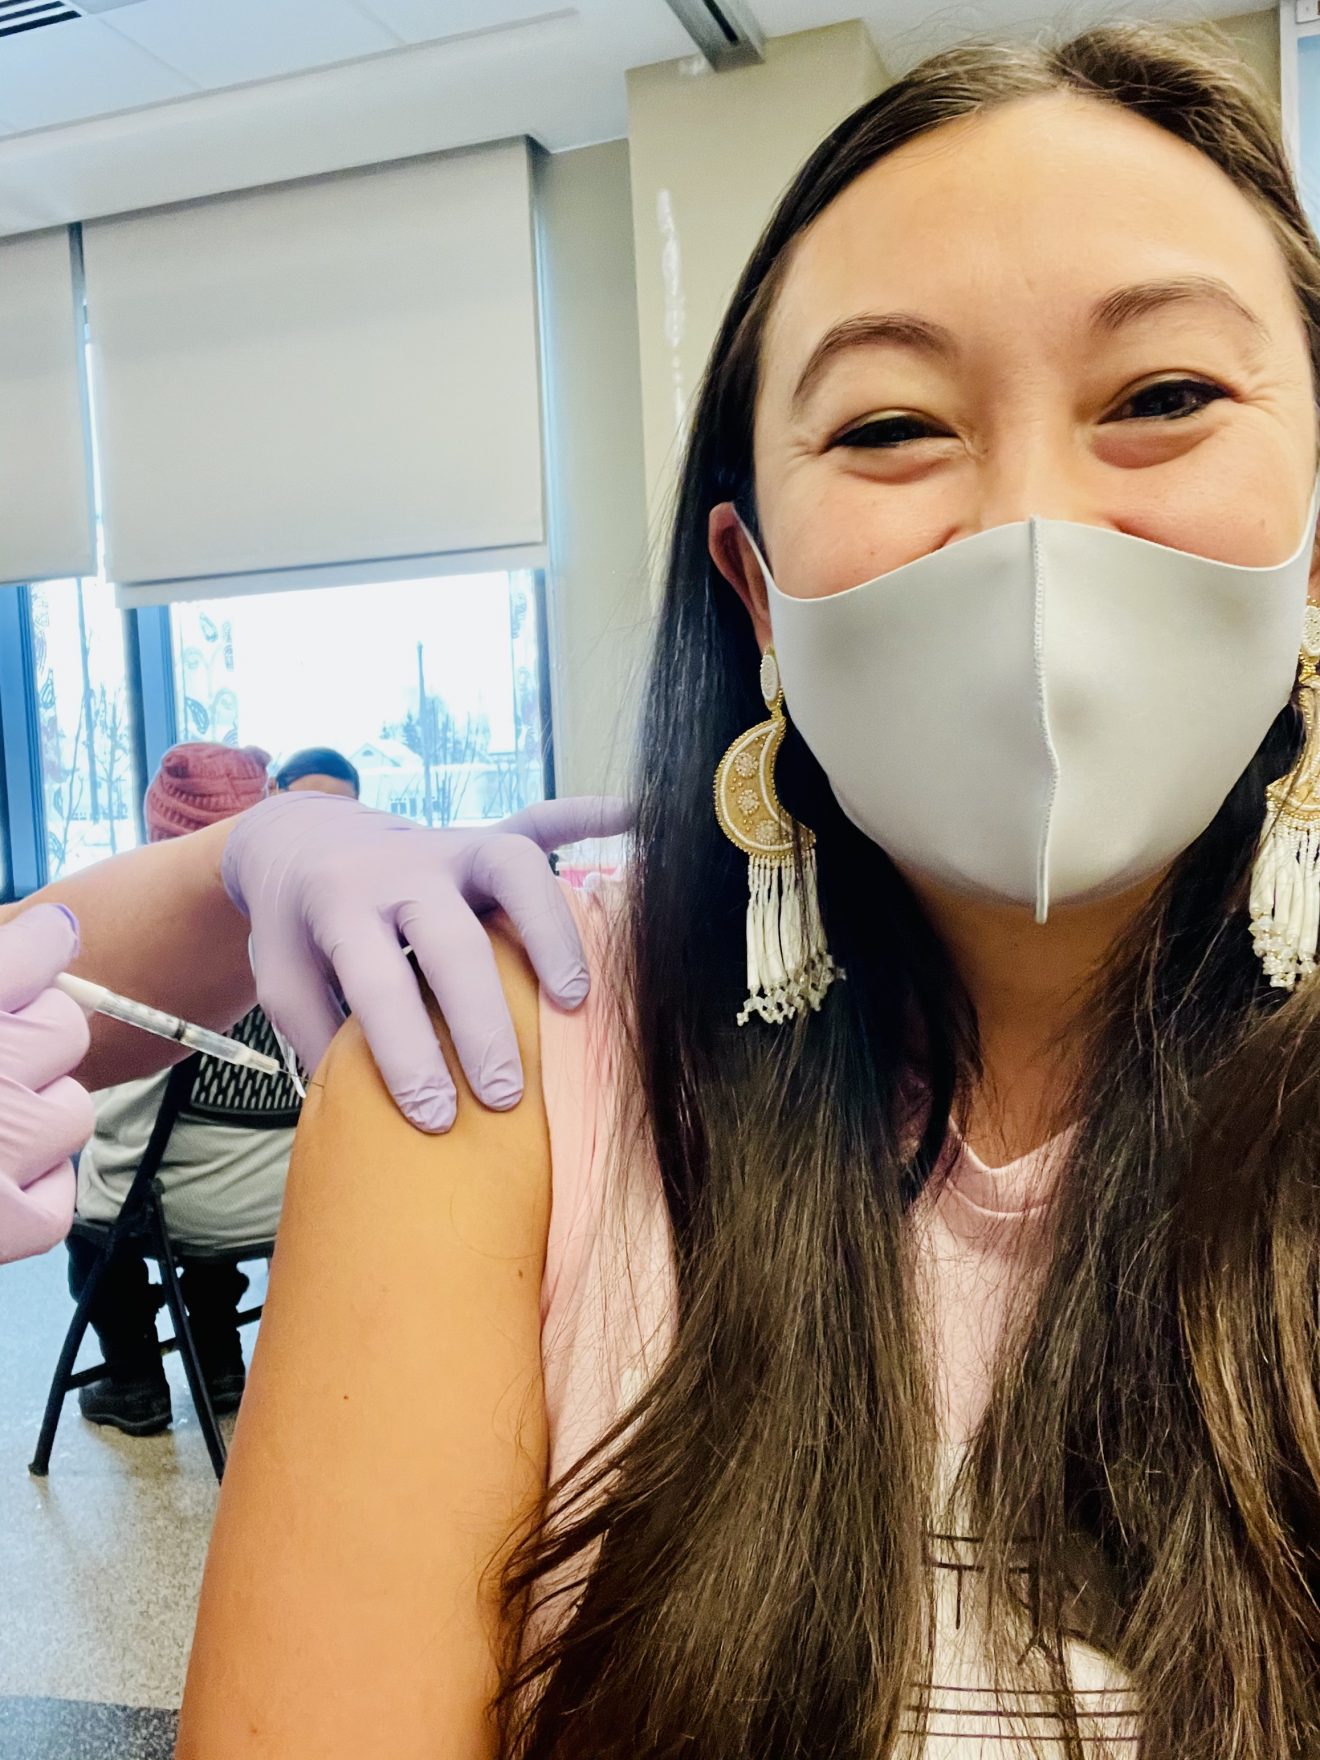 Woman with mask getting vaccinated